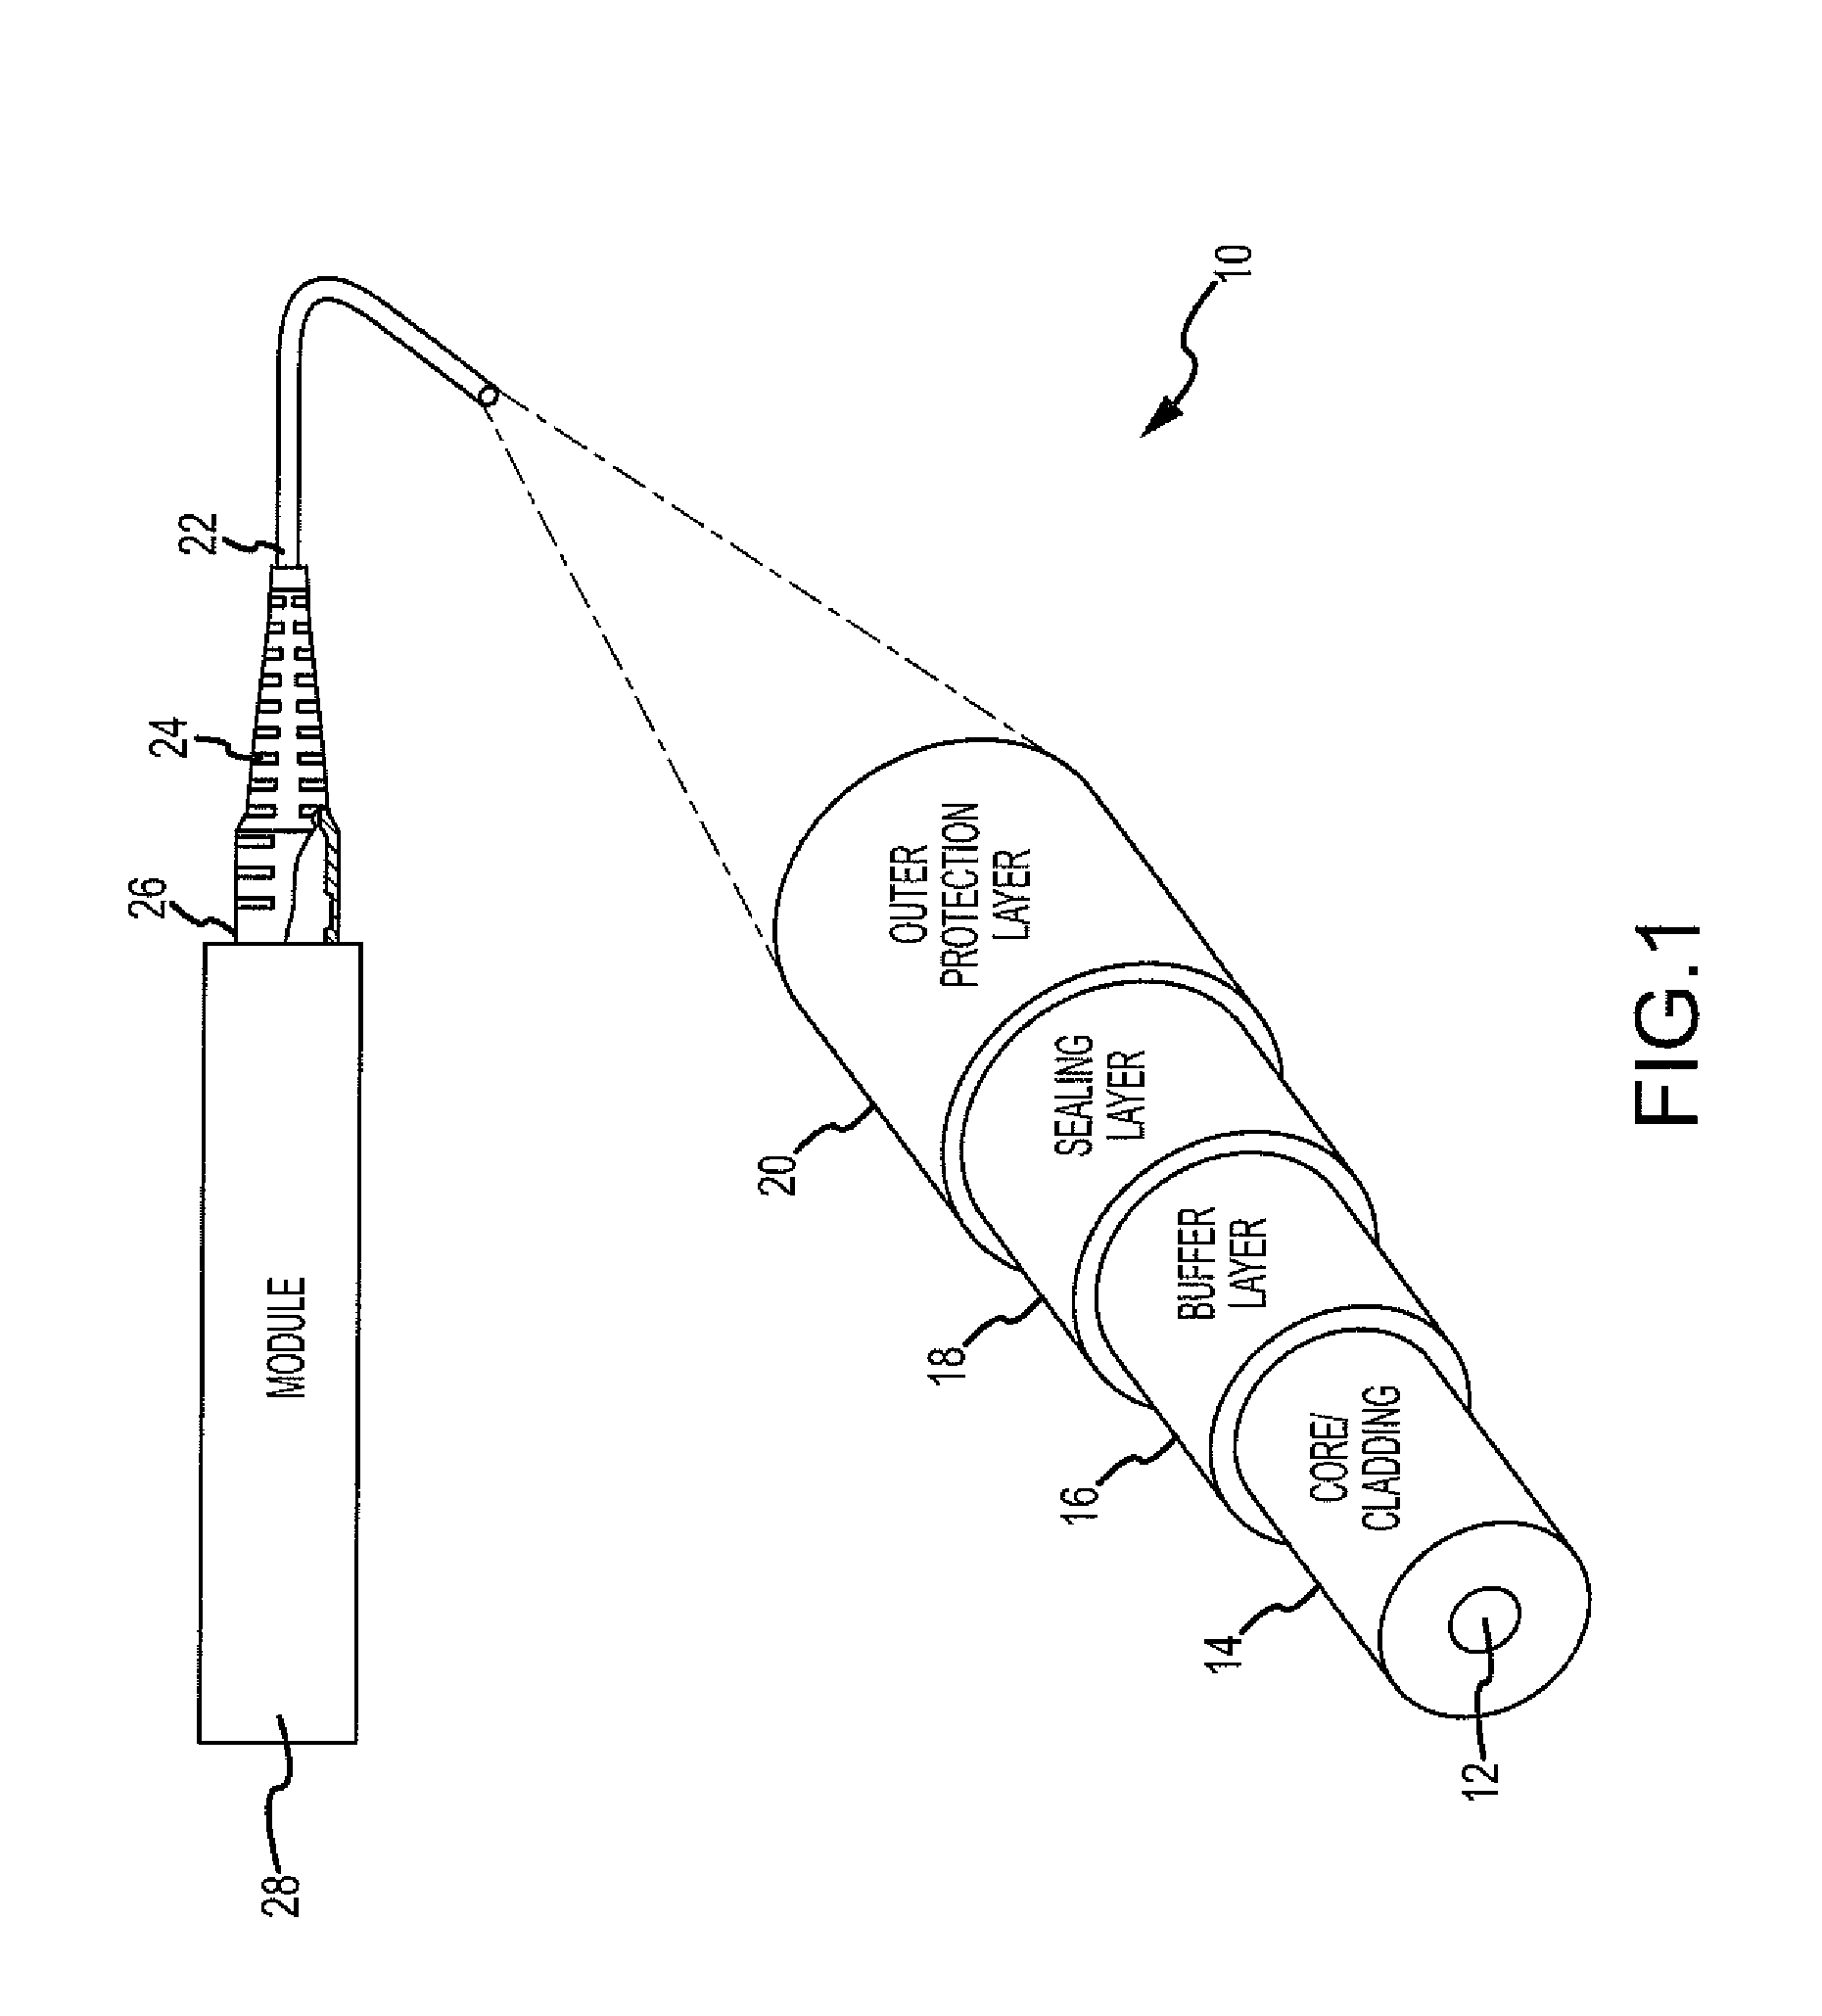 Self healing optical fiber cable assembly and method of making the same